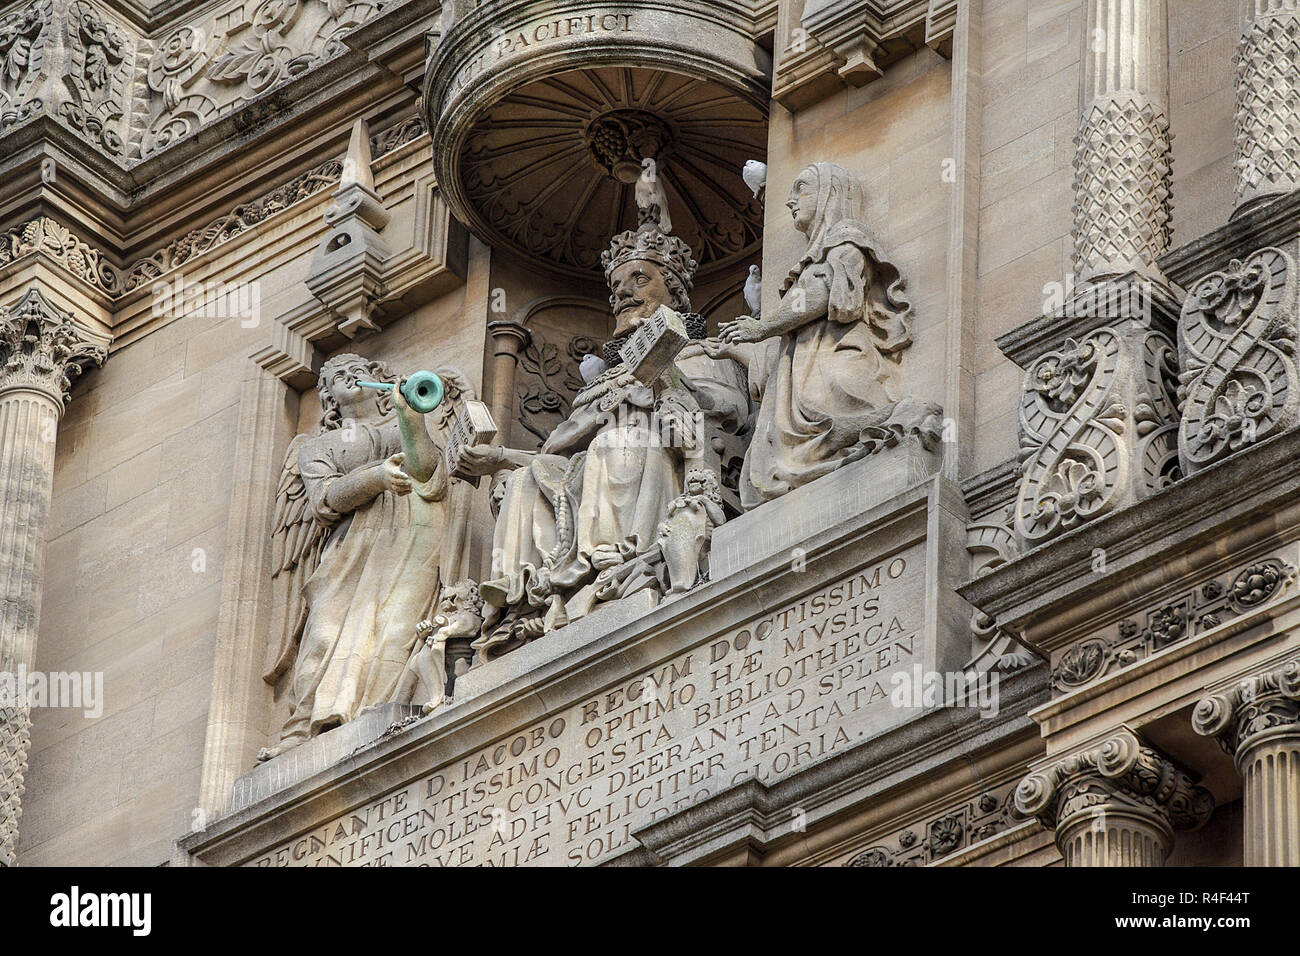 Architectural features within the internal confines in the courtyard of the Old Bodleian Library in the City of Oxford. Stock Photo